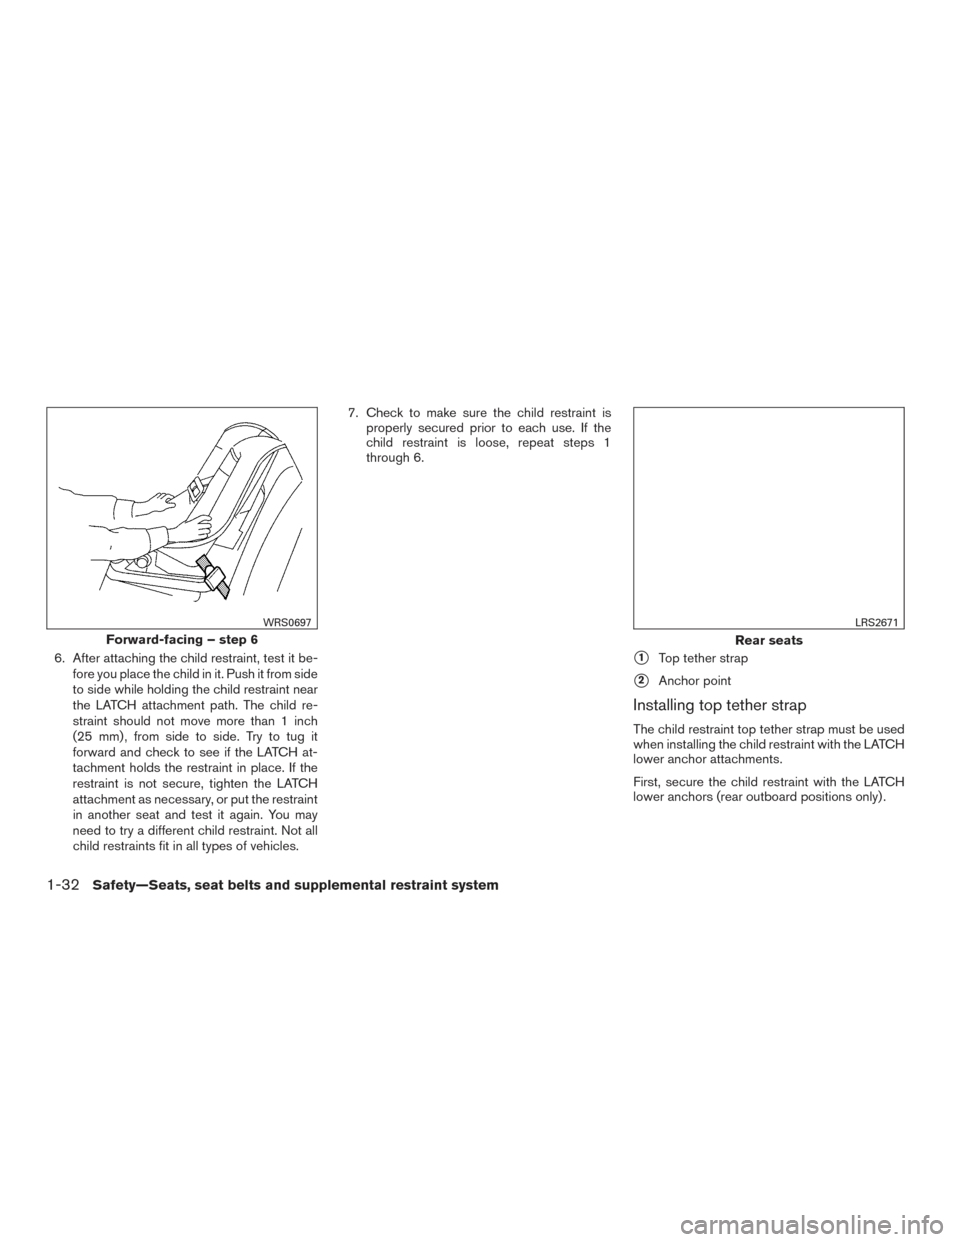 NISSAN MAXIMA 2016 A36 / 8.G Service Manual 6. After attaching the child restraint, test it be-fore you place the child in it. Push it from side
to side while holding the child restraint near
the LATCH attachment path. The child re-
straint sho